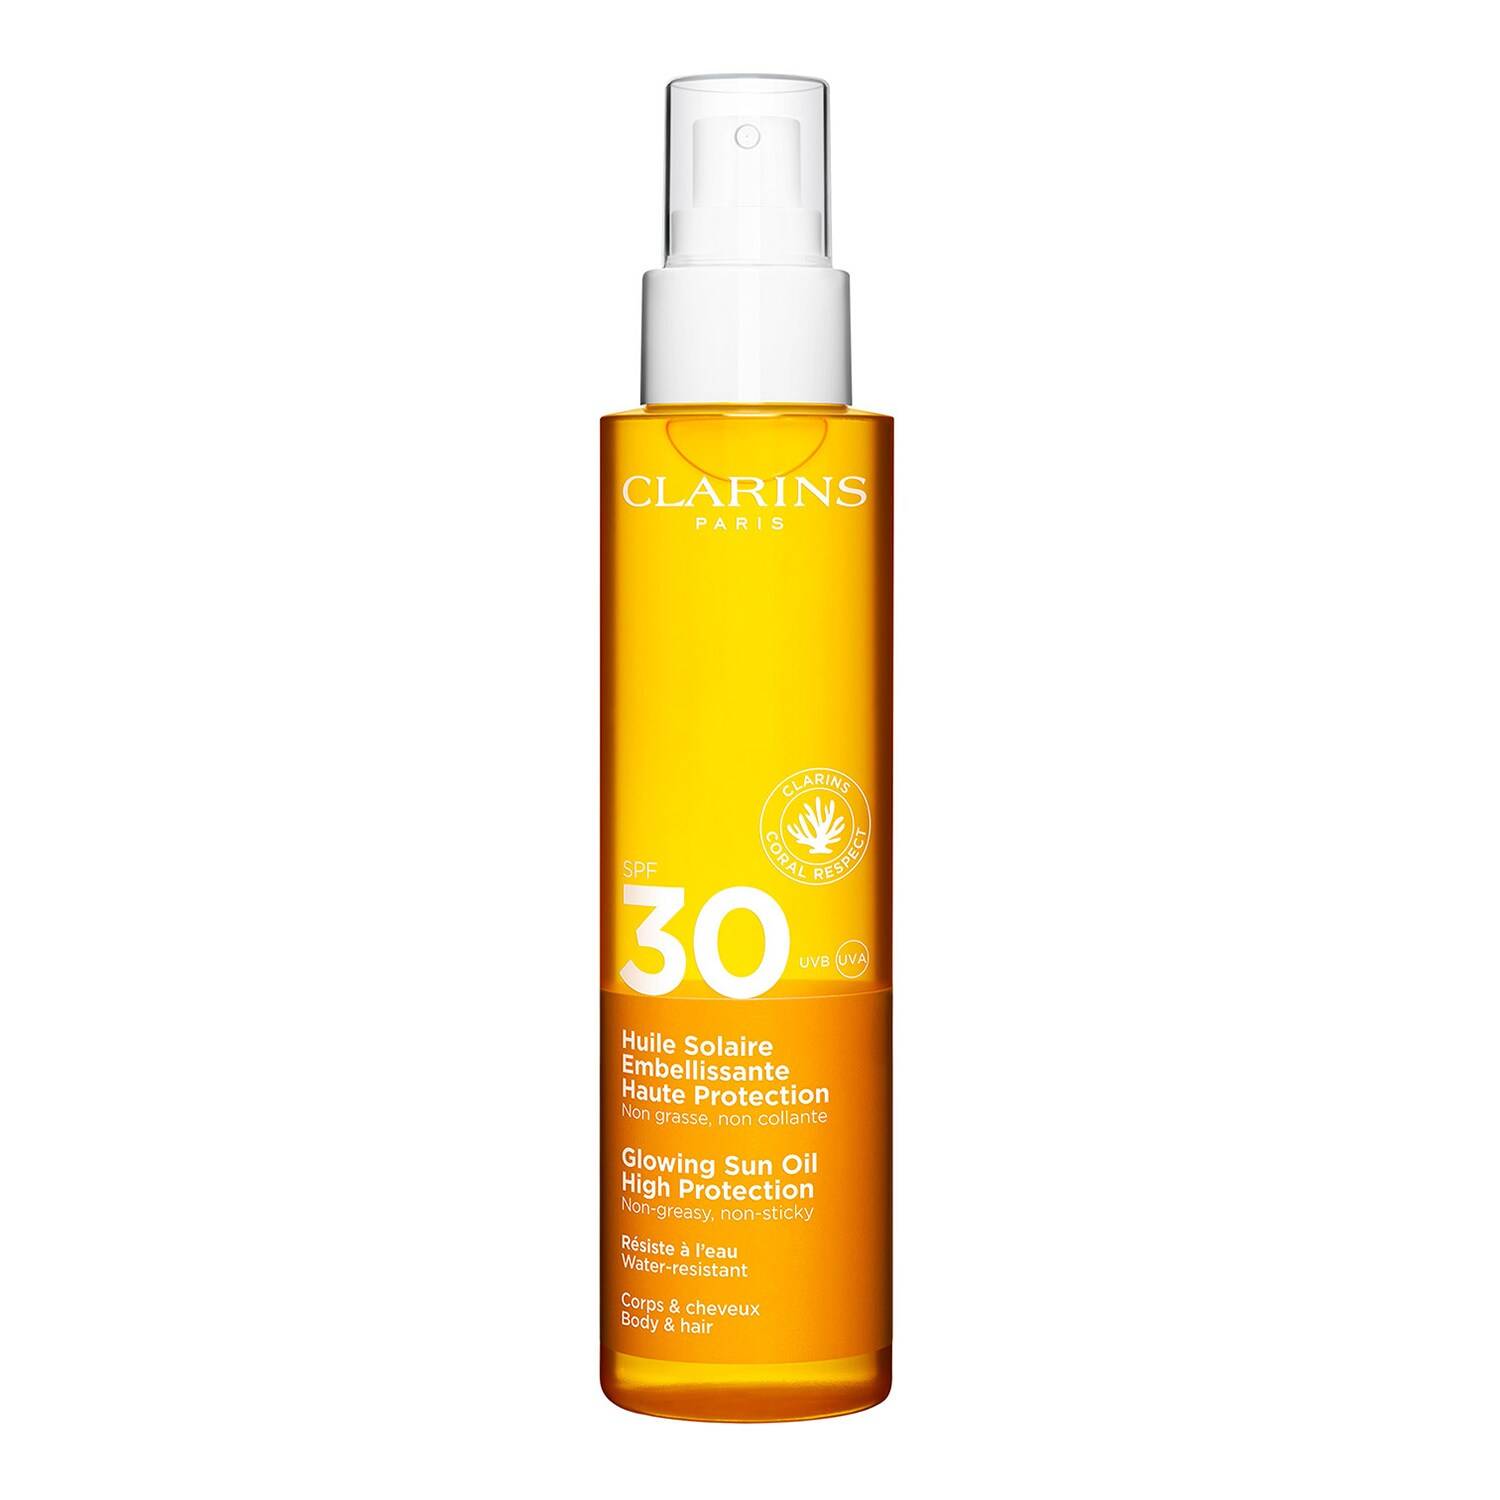 Clarins Glowing Sun Oil High Protection Spf30 150Ml